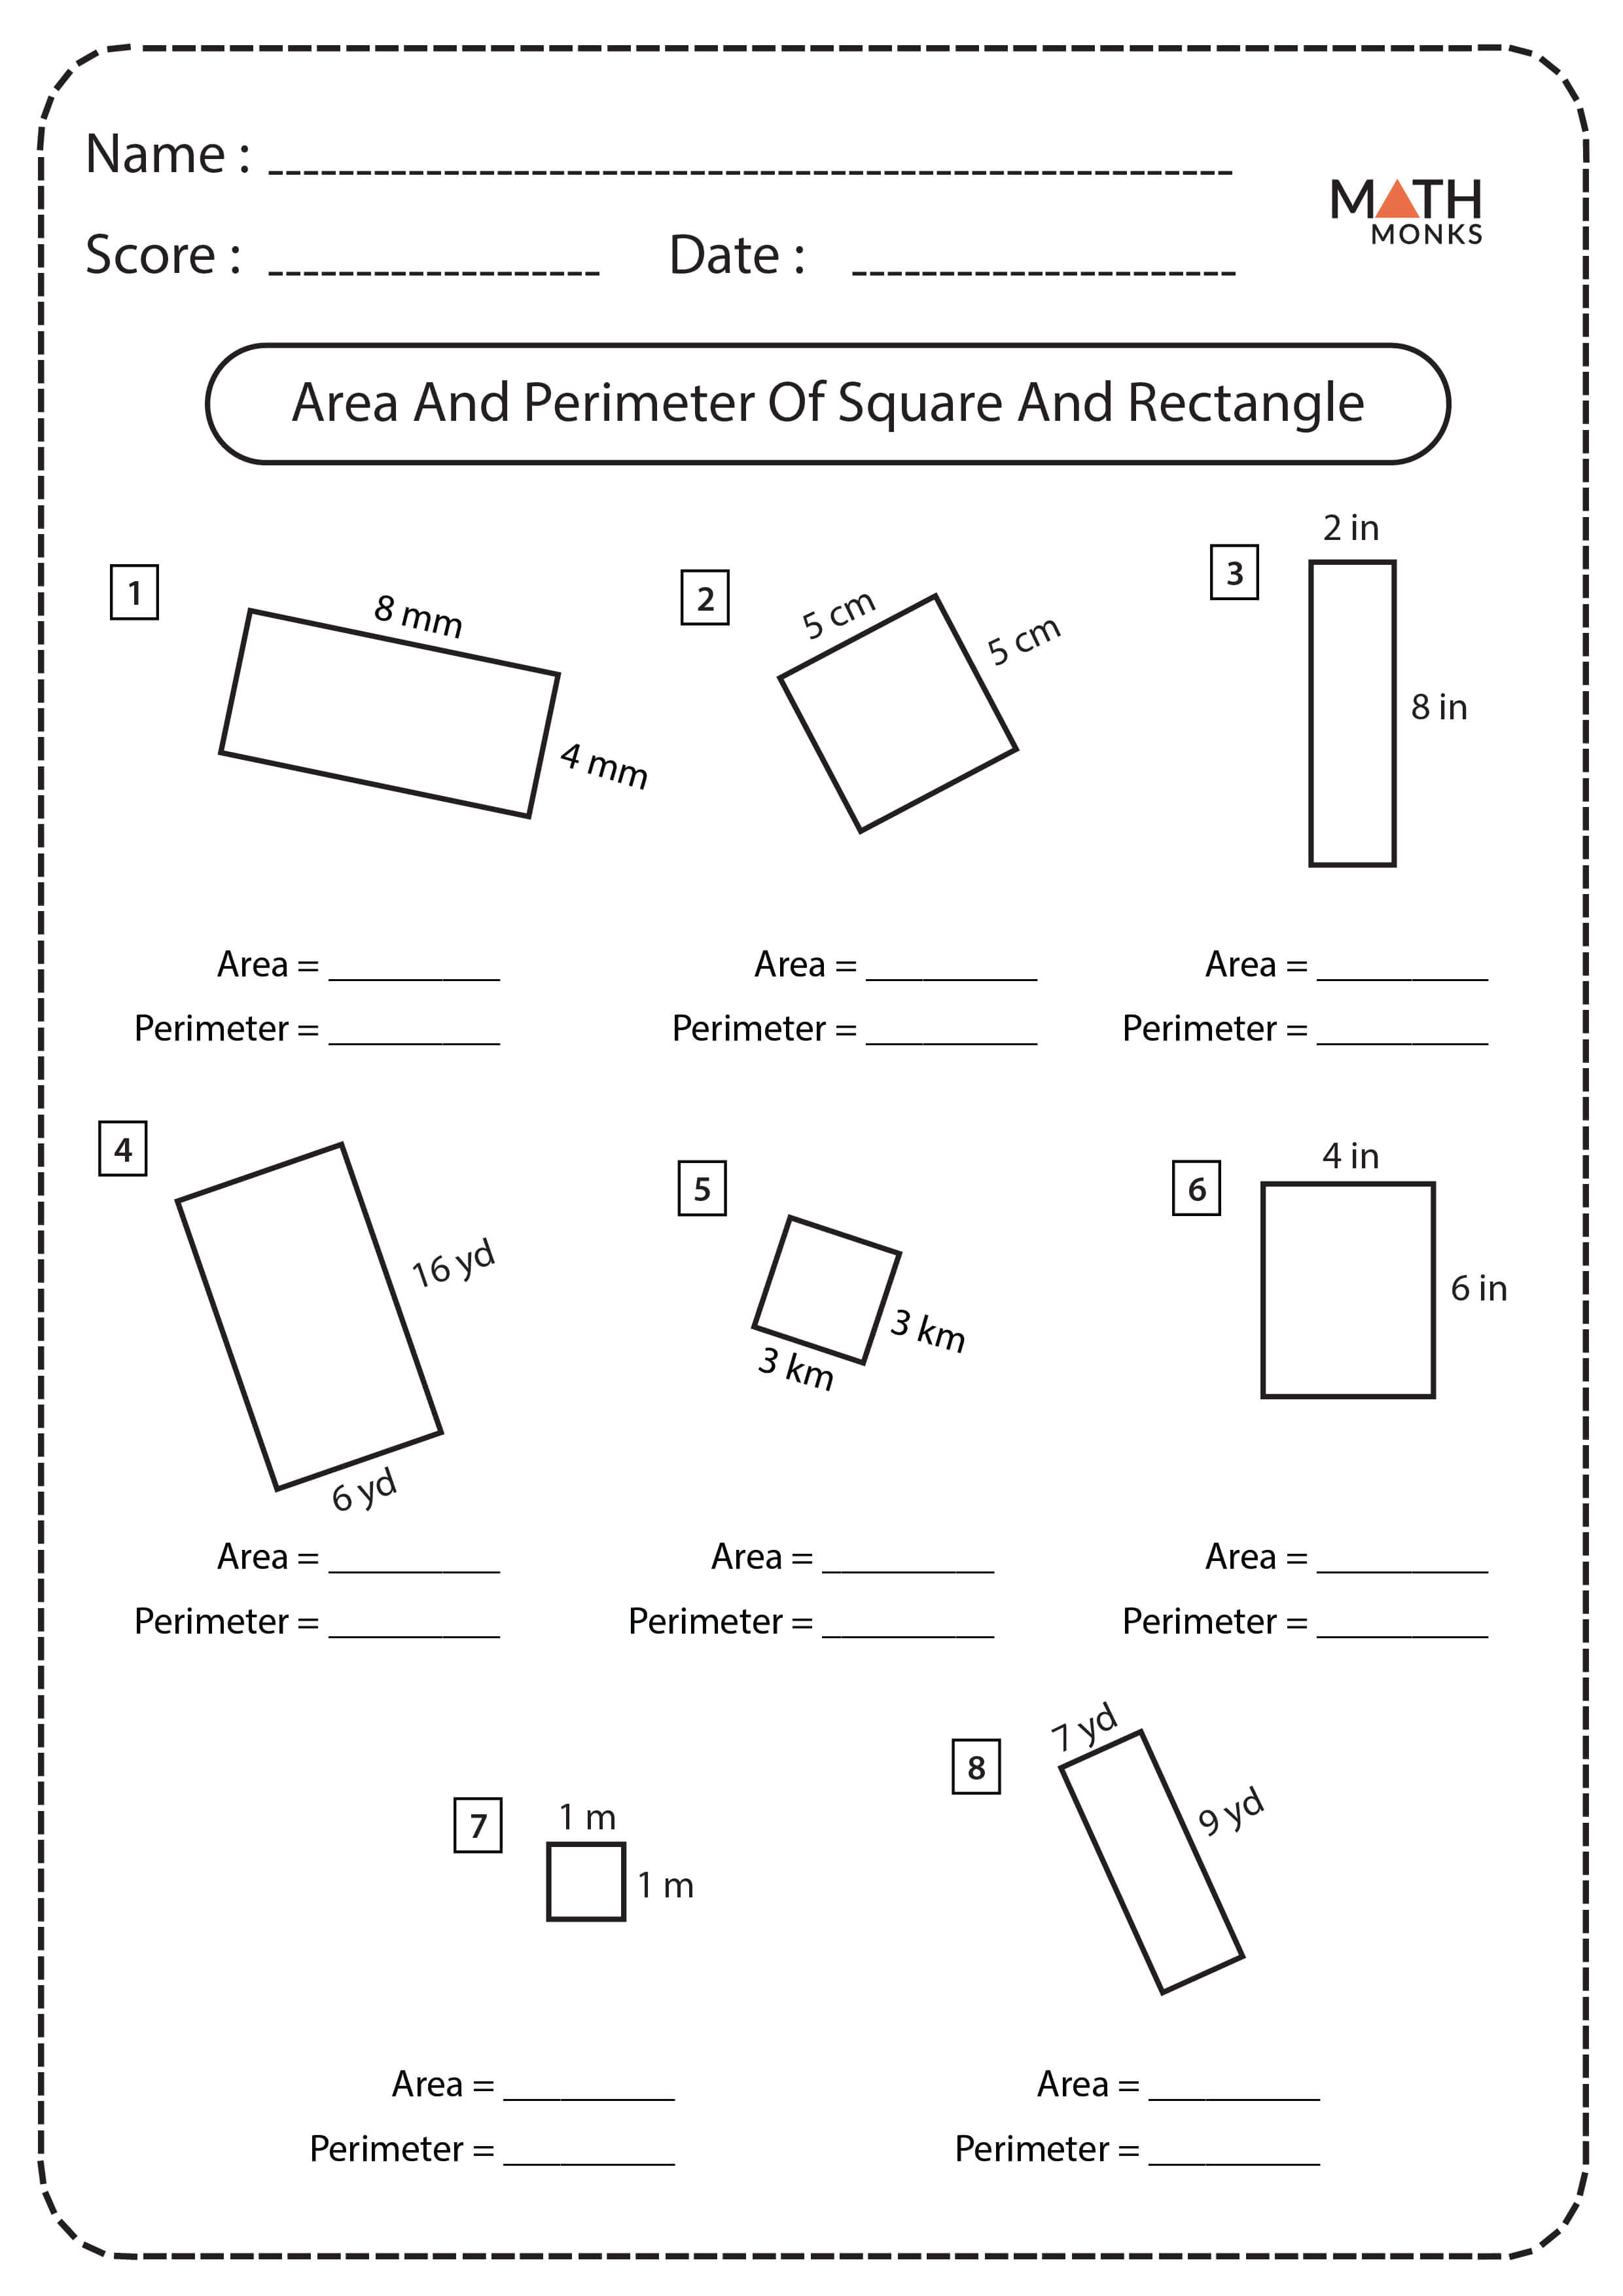 Squares and Rectangles Worksheets | Math Monks